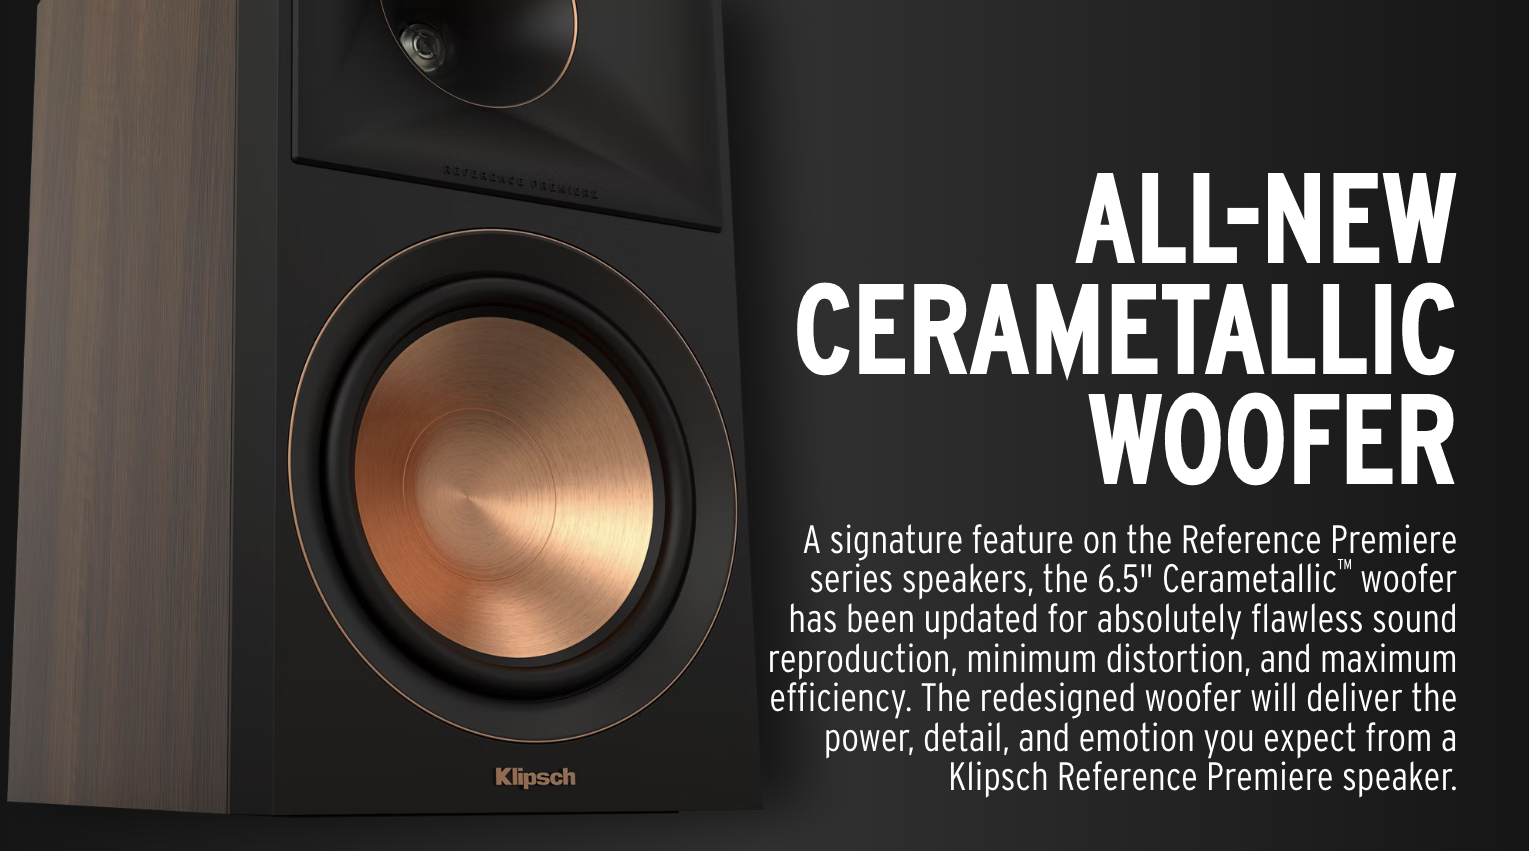 A signature feature on the Reference Premiere series speakers, the dual 8